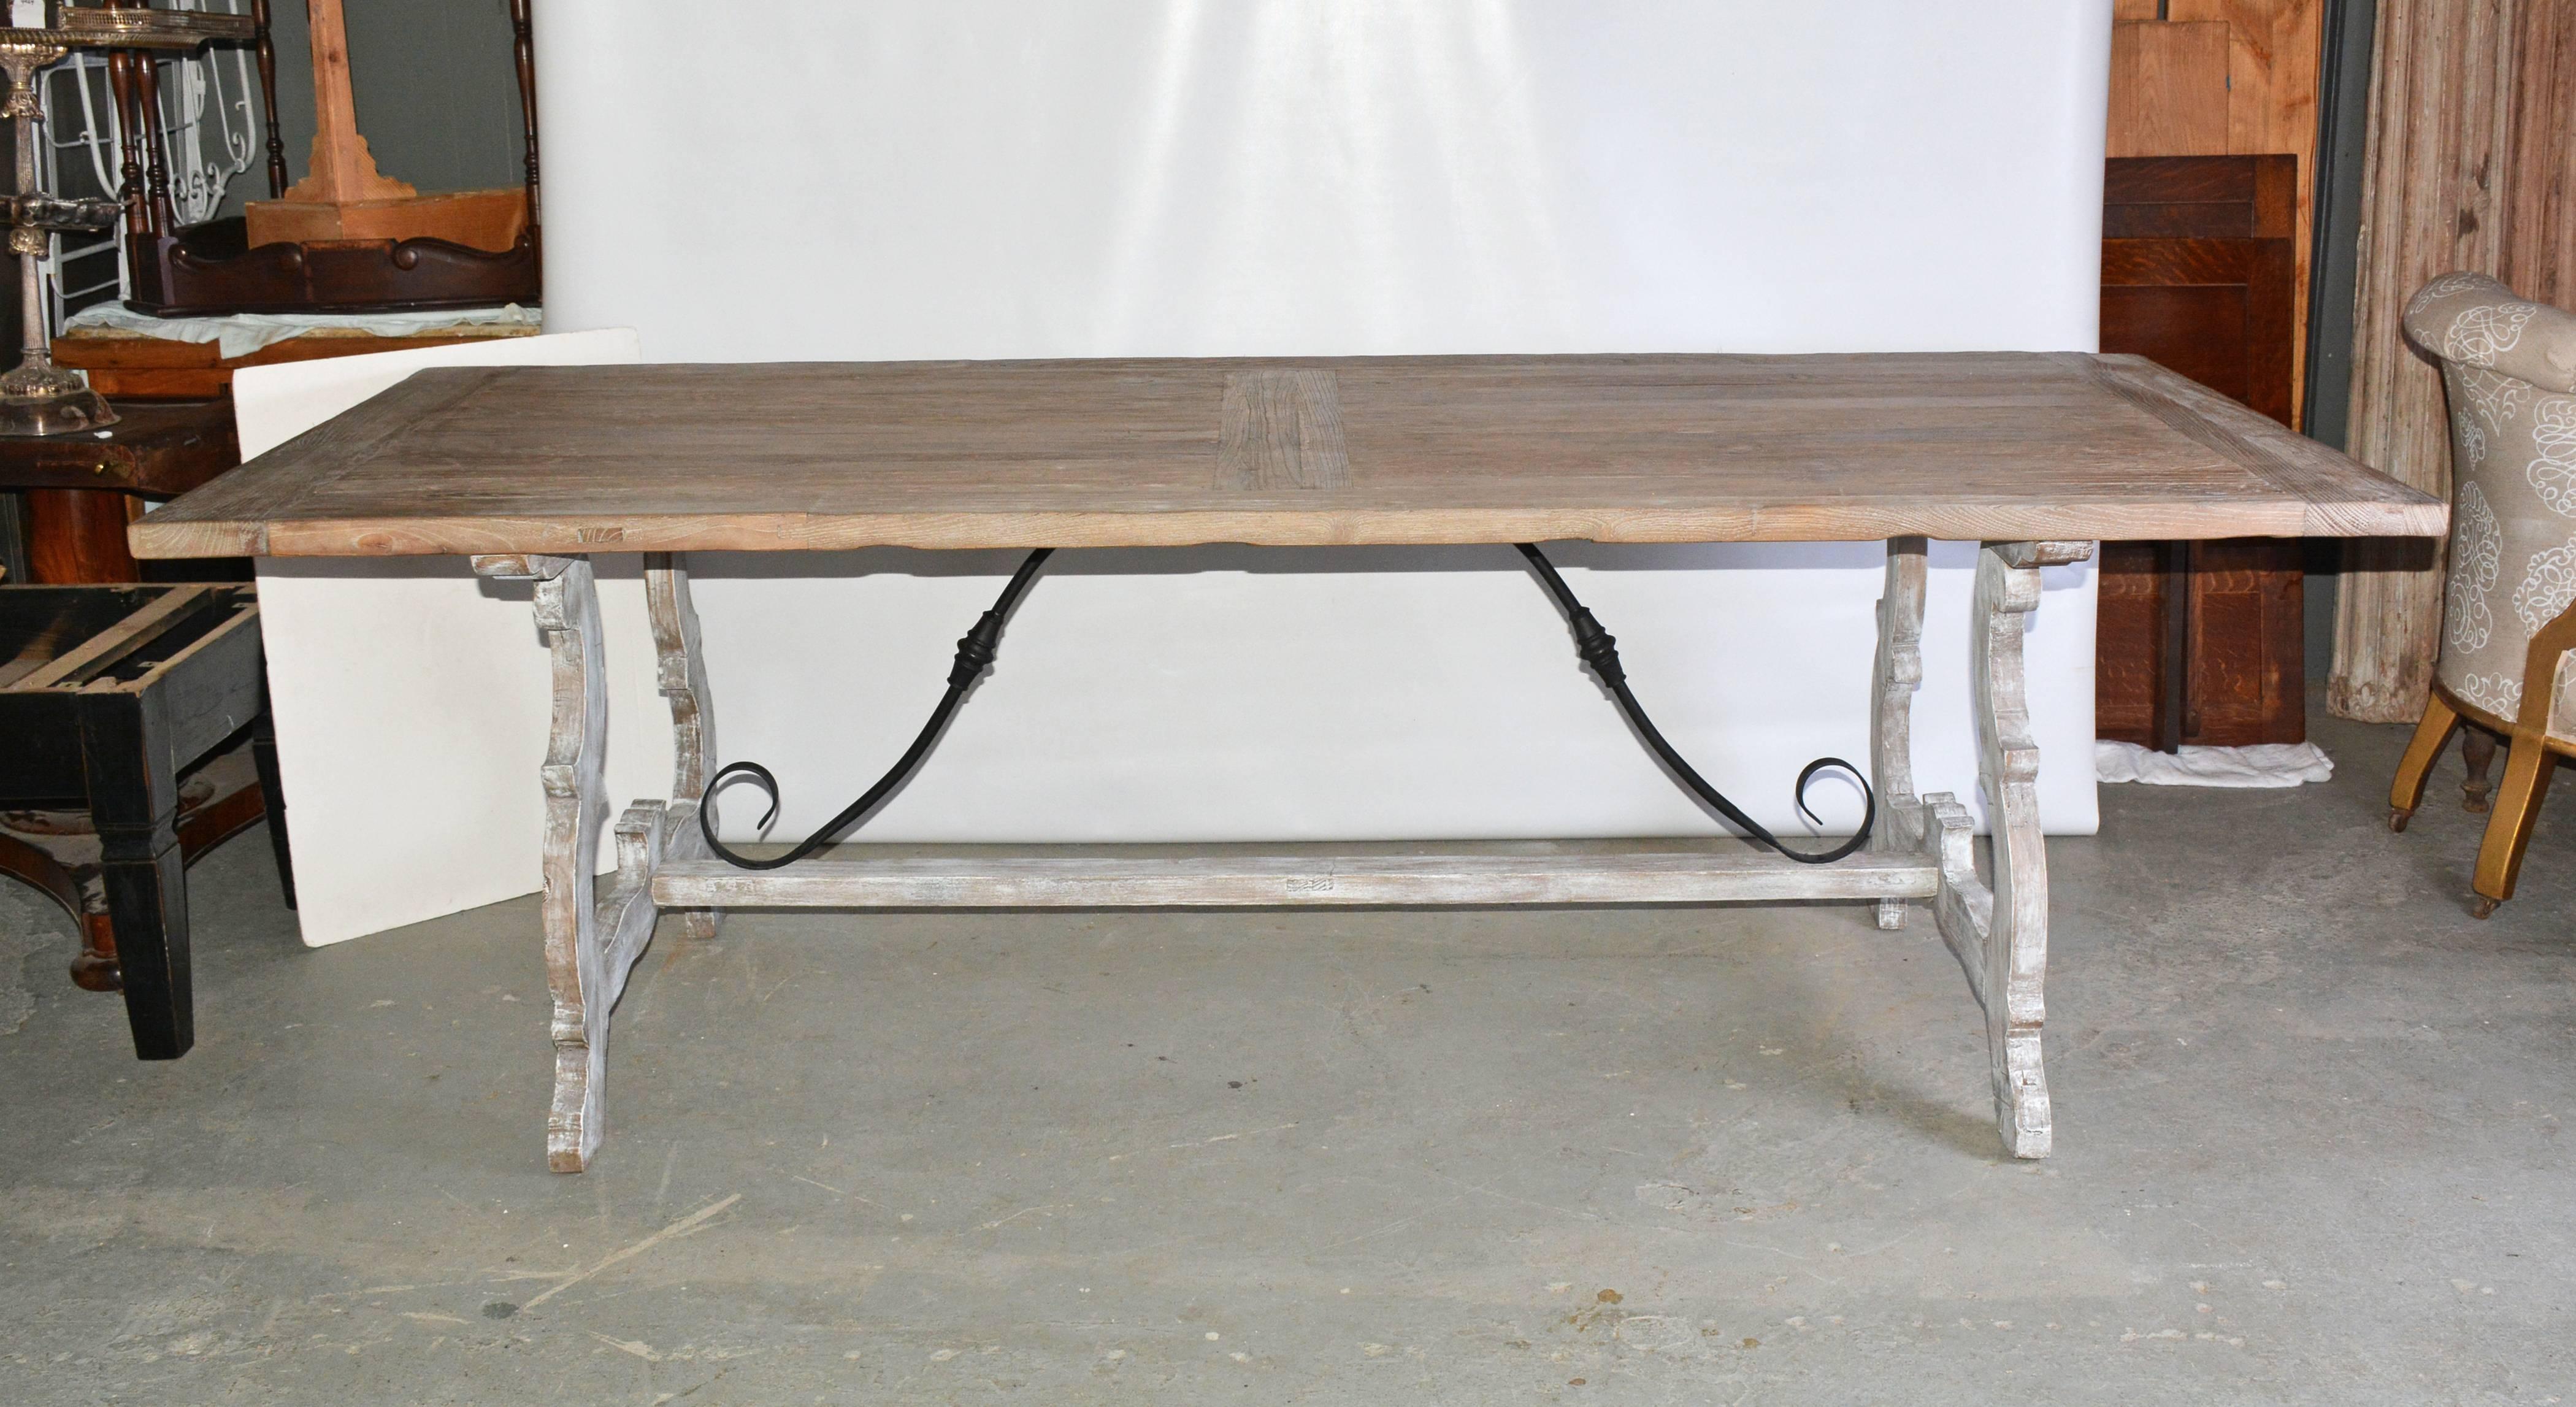 Can be Mediterranean Tuscan Italian or Spanish Renaissance style refectory dining table. Combines a elm wood top with breadboard ends and a Baroque-style oak and wrought iron base. Seats up to ten diners.